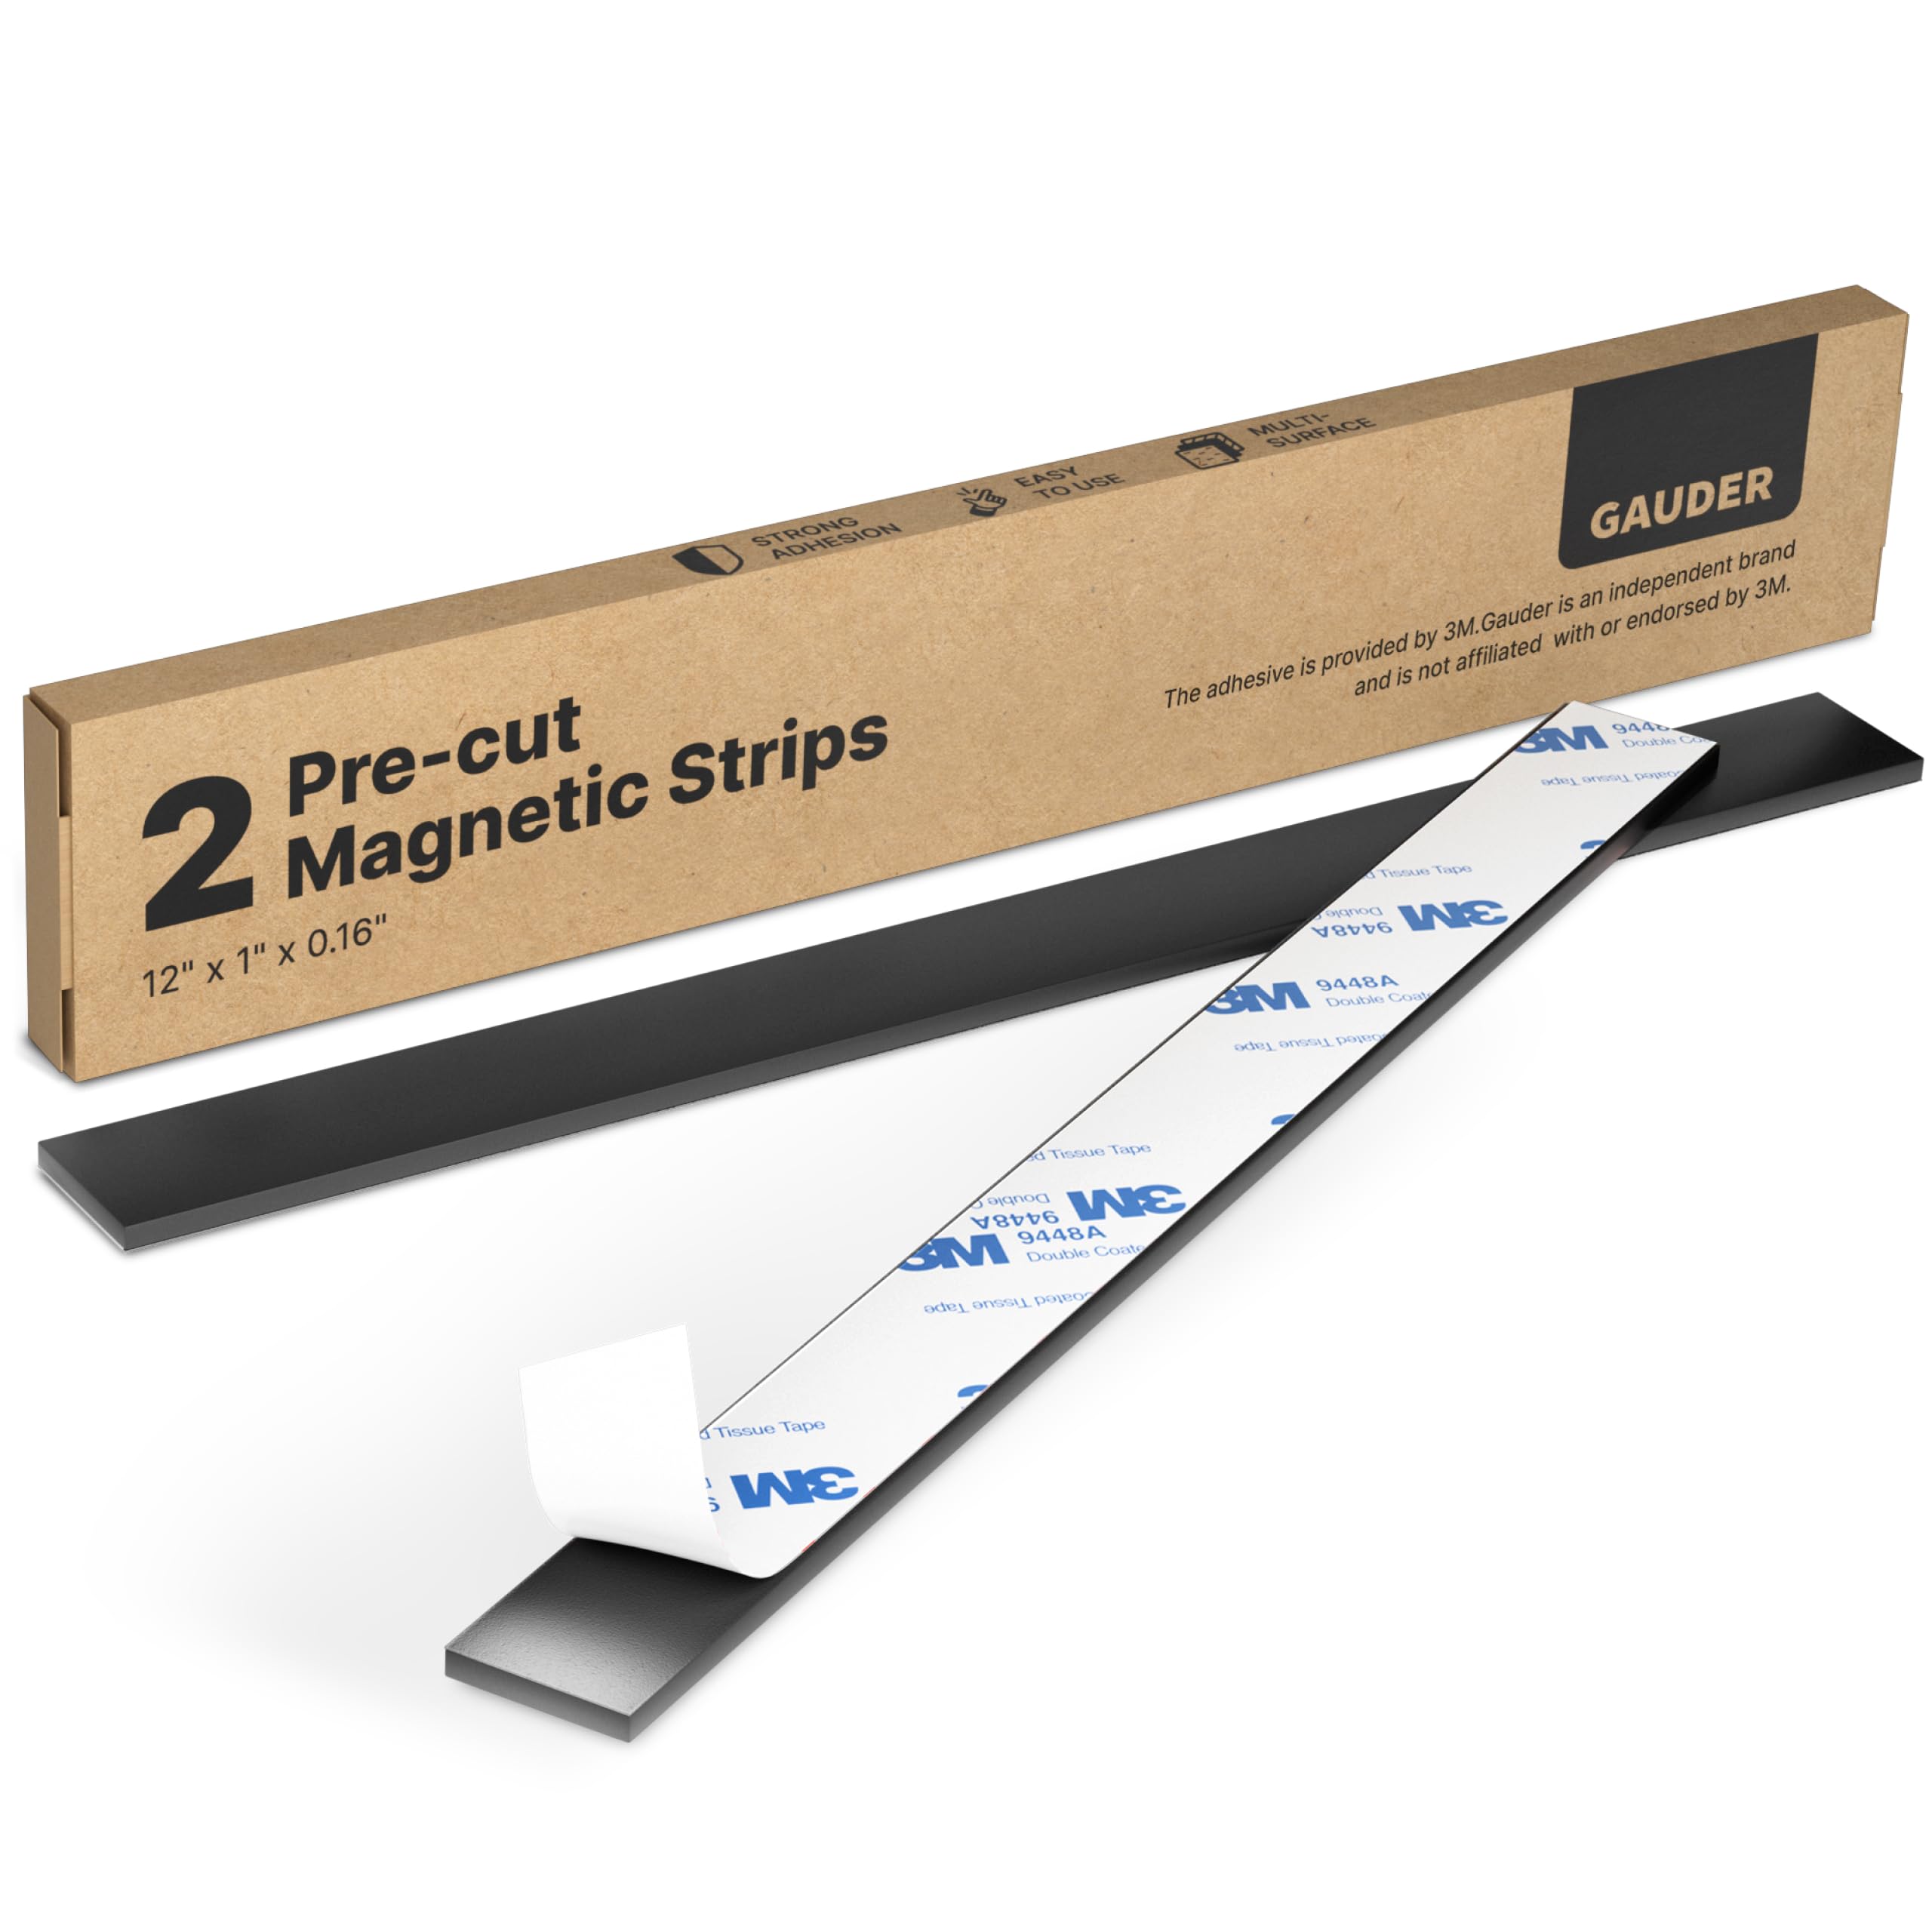 7 GAUDER Magnetic Strips with Adhesive Backing (12 inches x 0.16 inches)